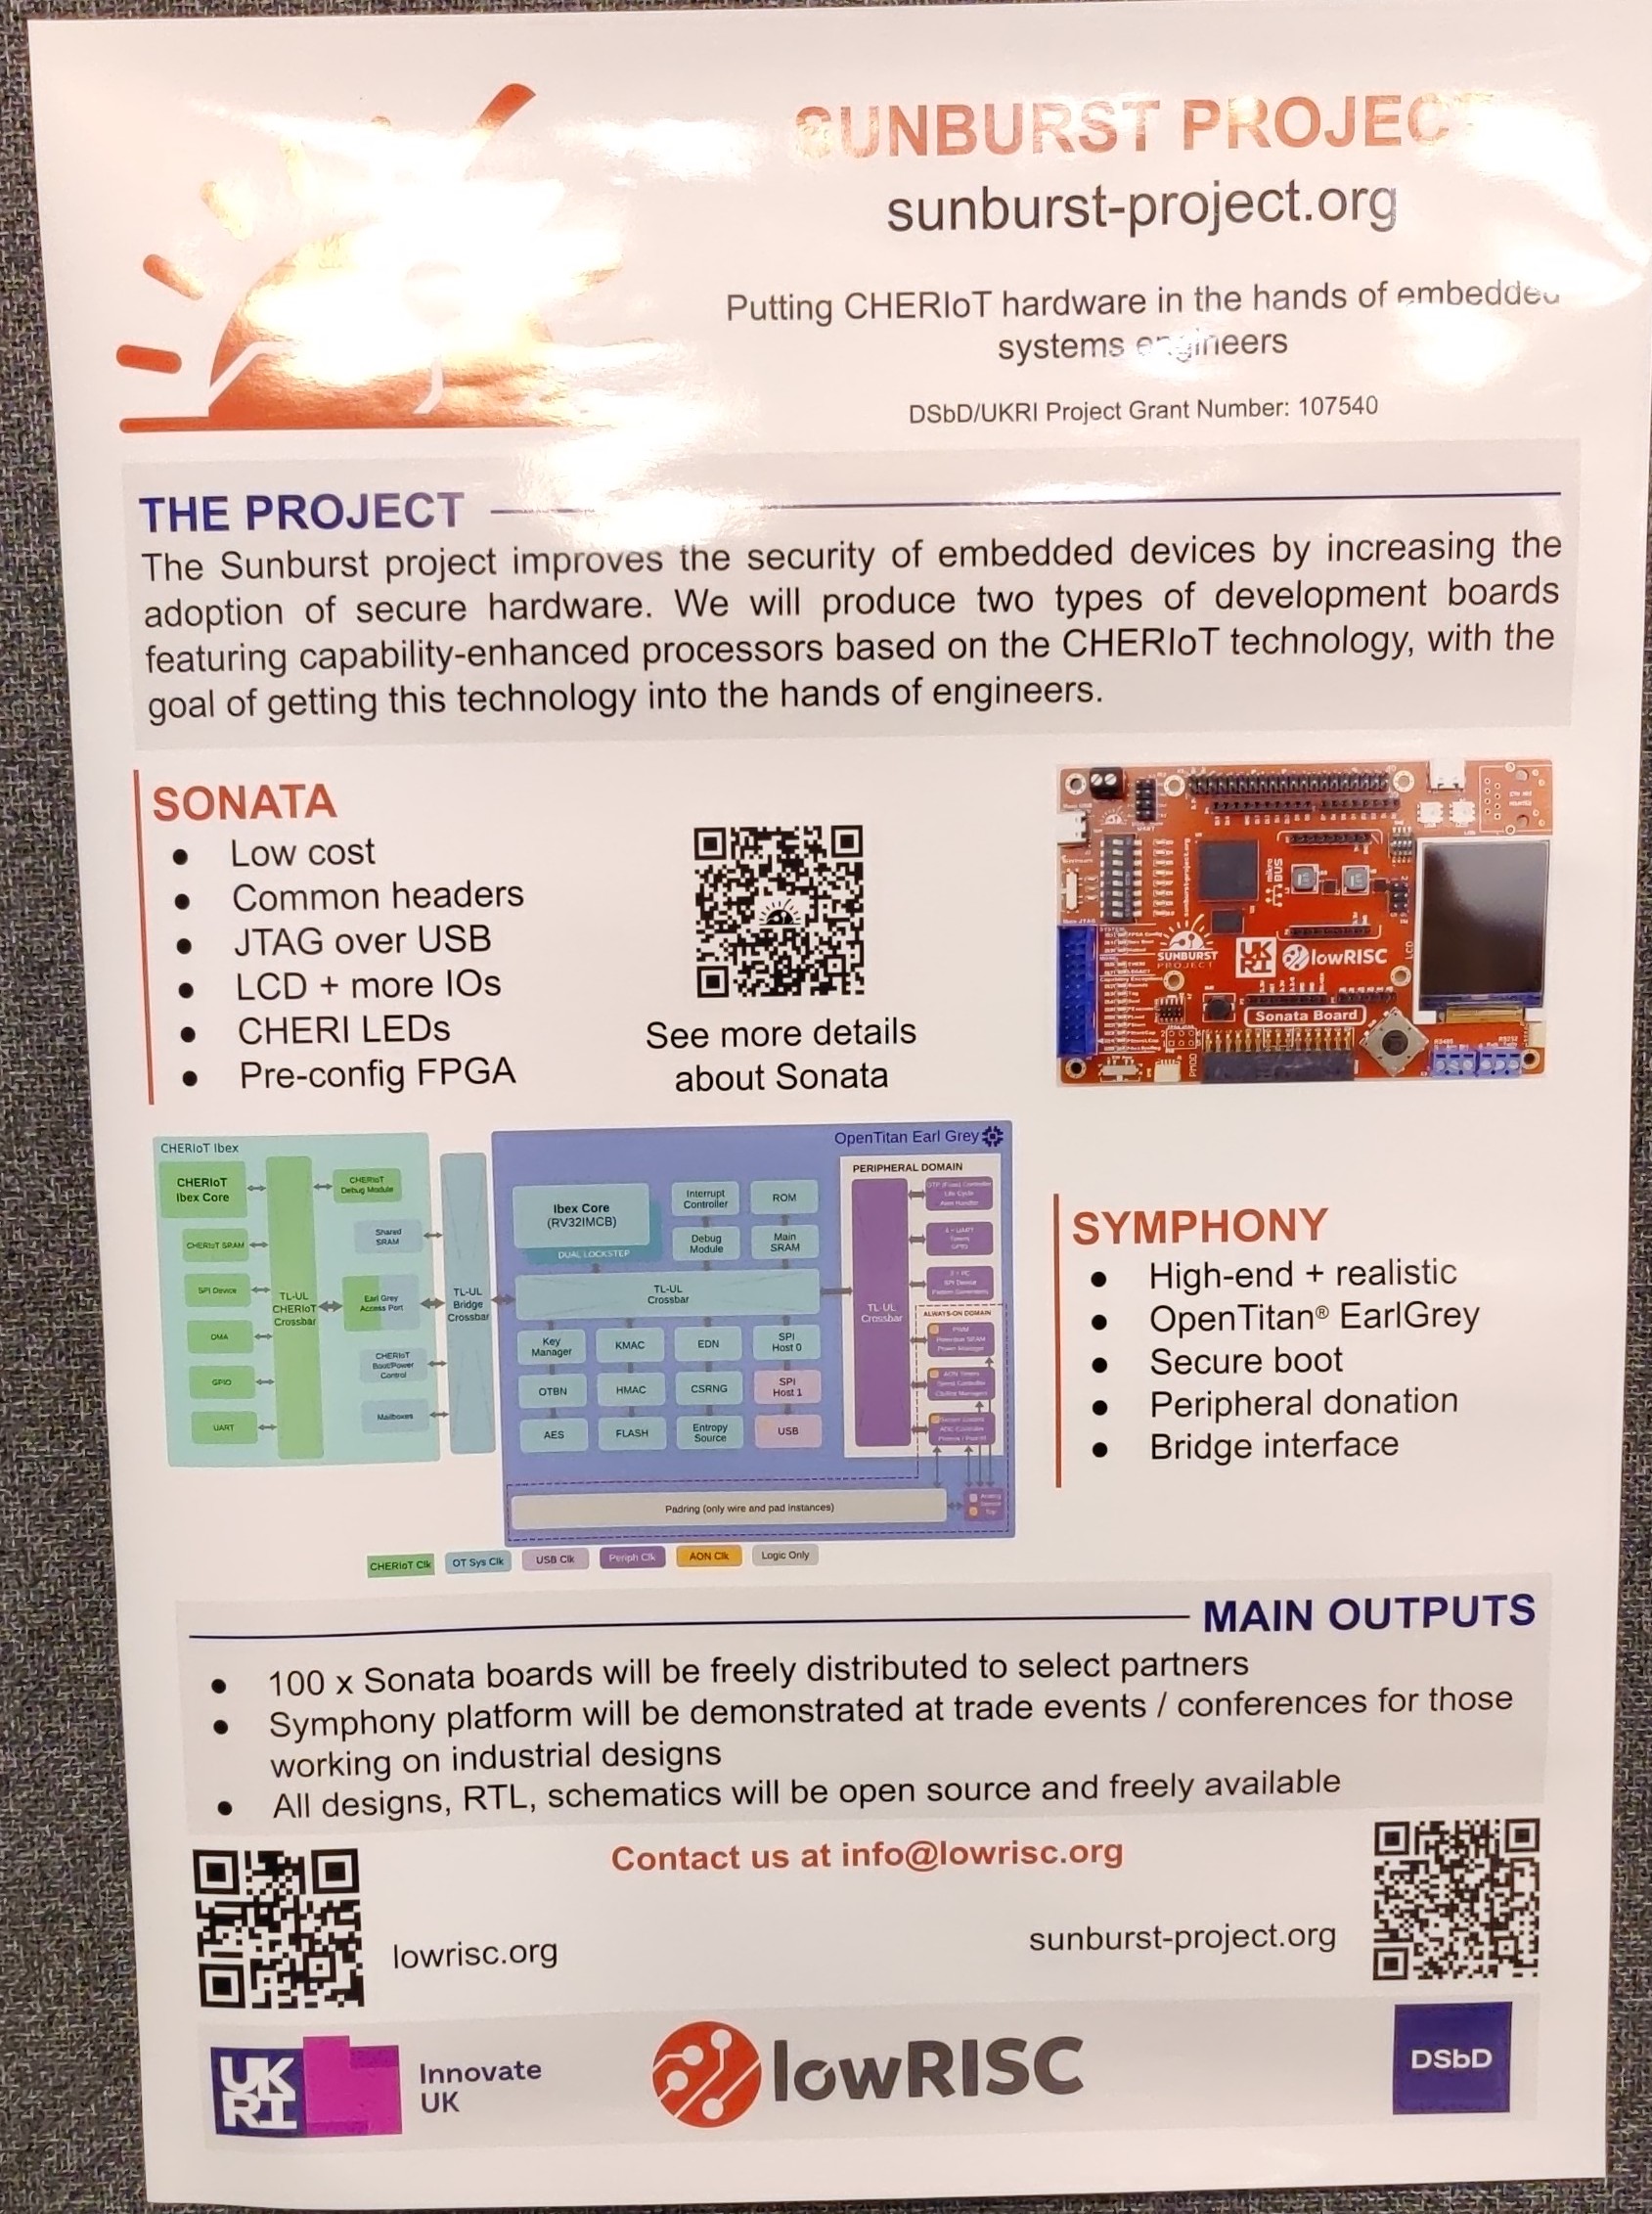 lowRISC showed a poster about the Sunburst FPGA